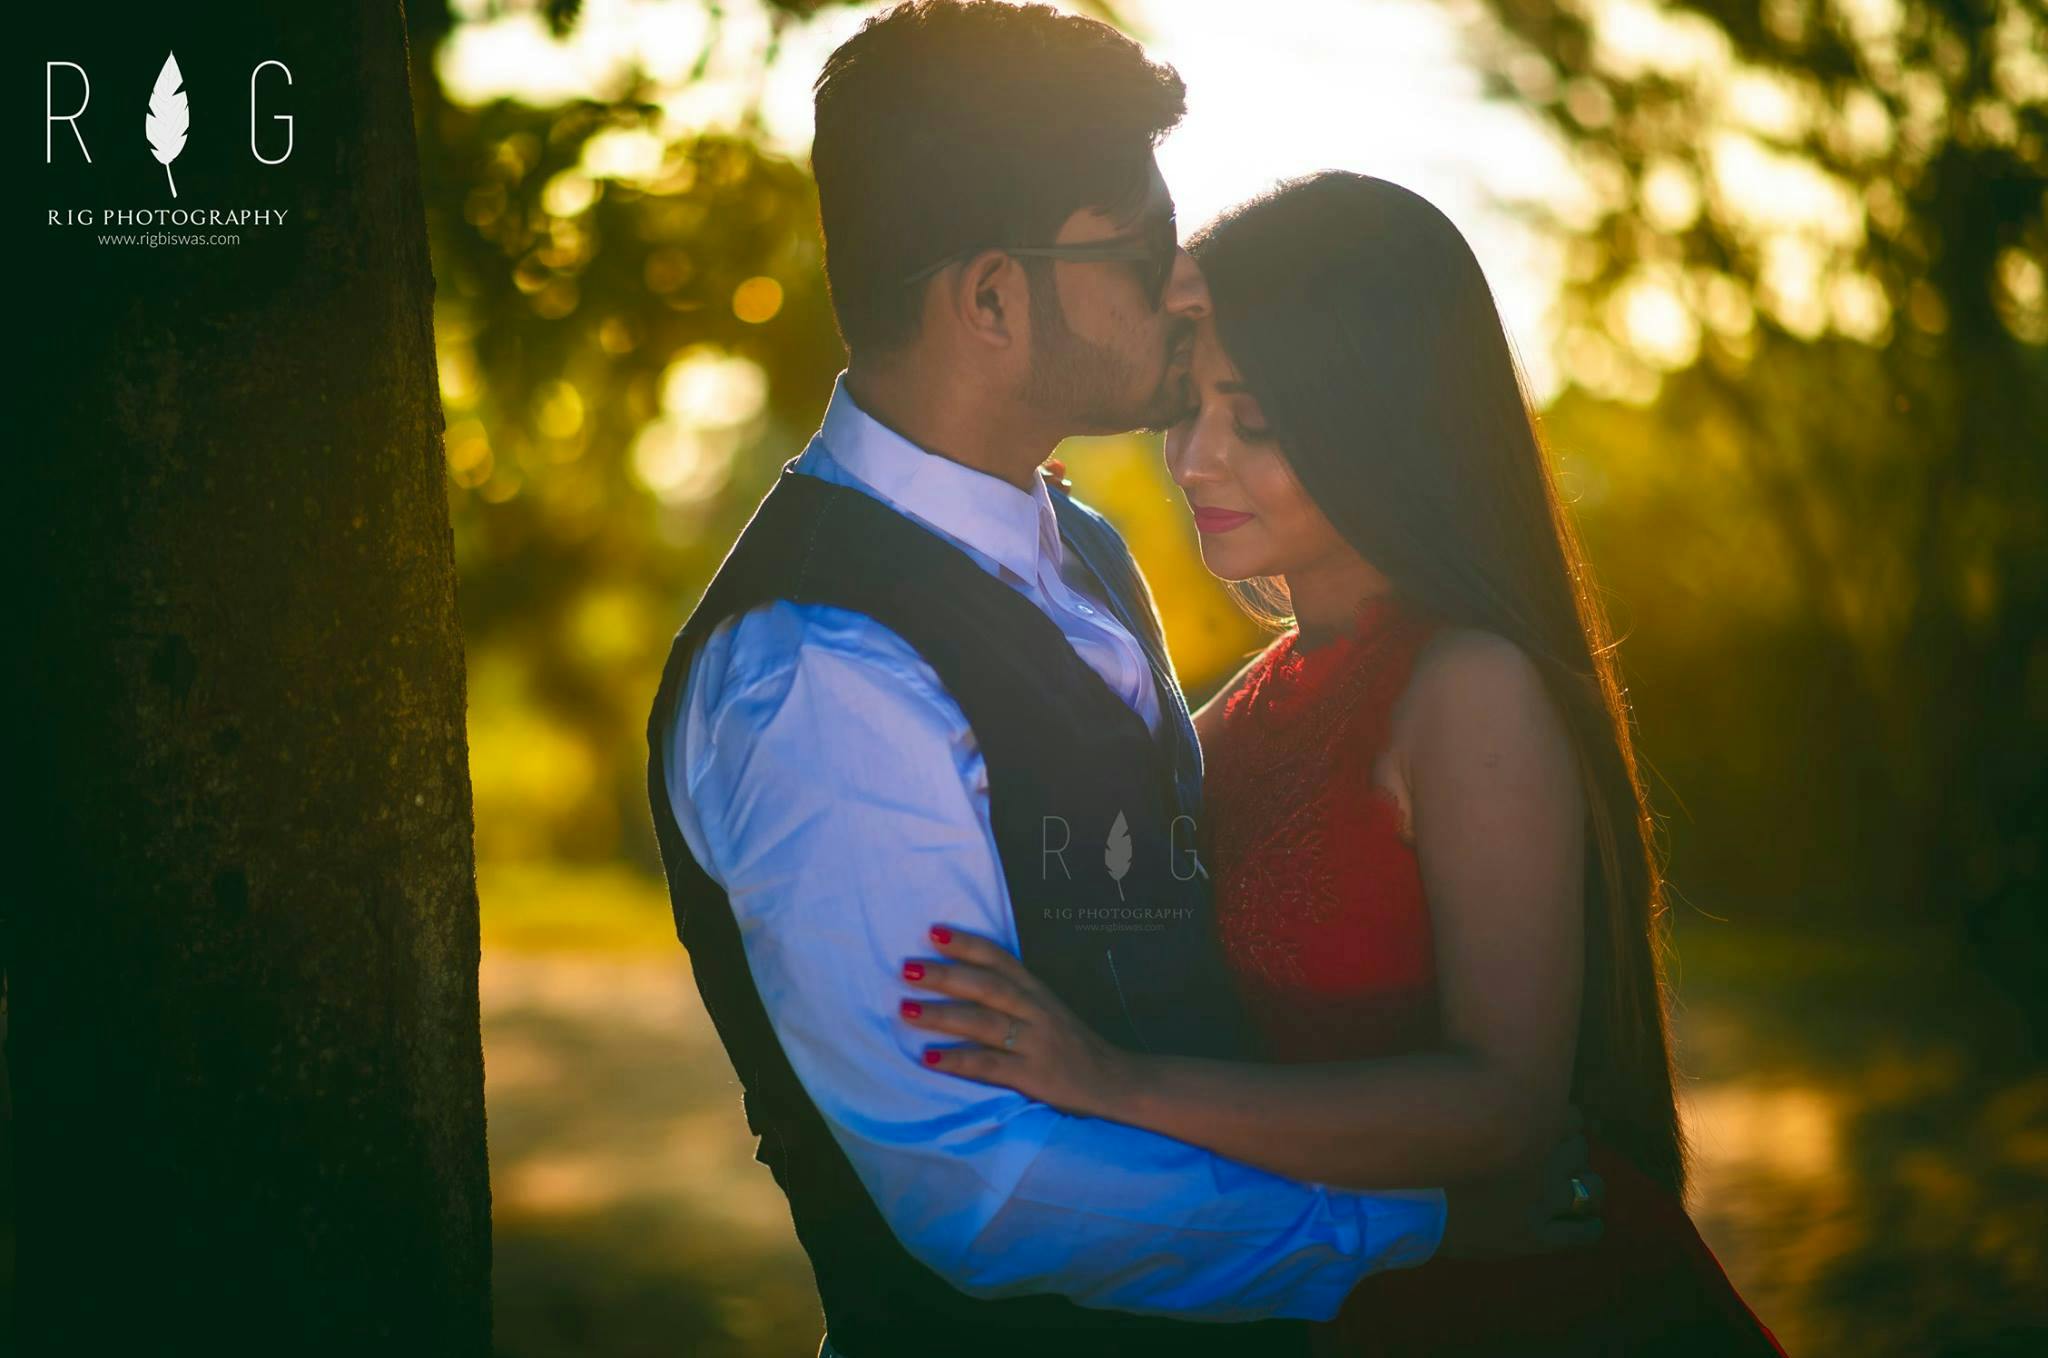 Beautiful location for couple photography